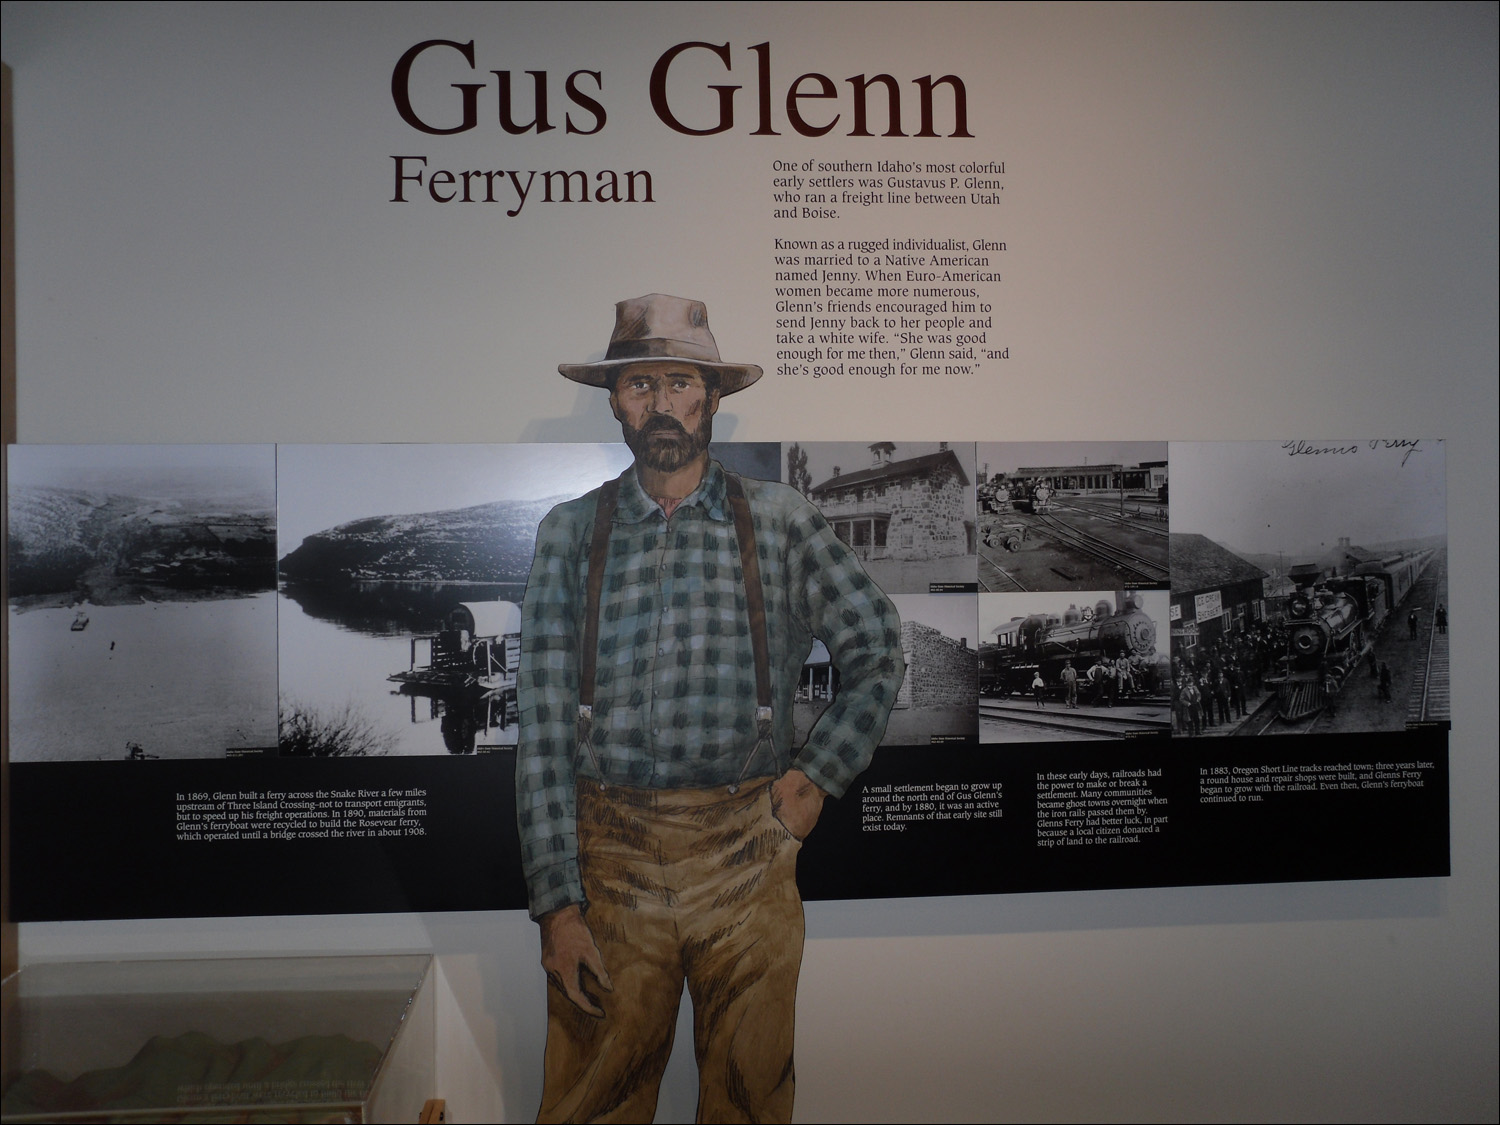 Displays @ the Oregan Trail History & Education Center in the Three Islands Crossing State Park- Gus Glen established ferry across the Snake River.